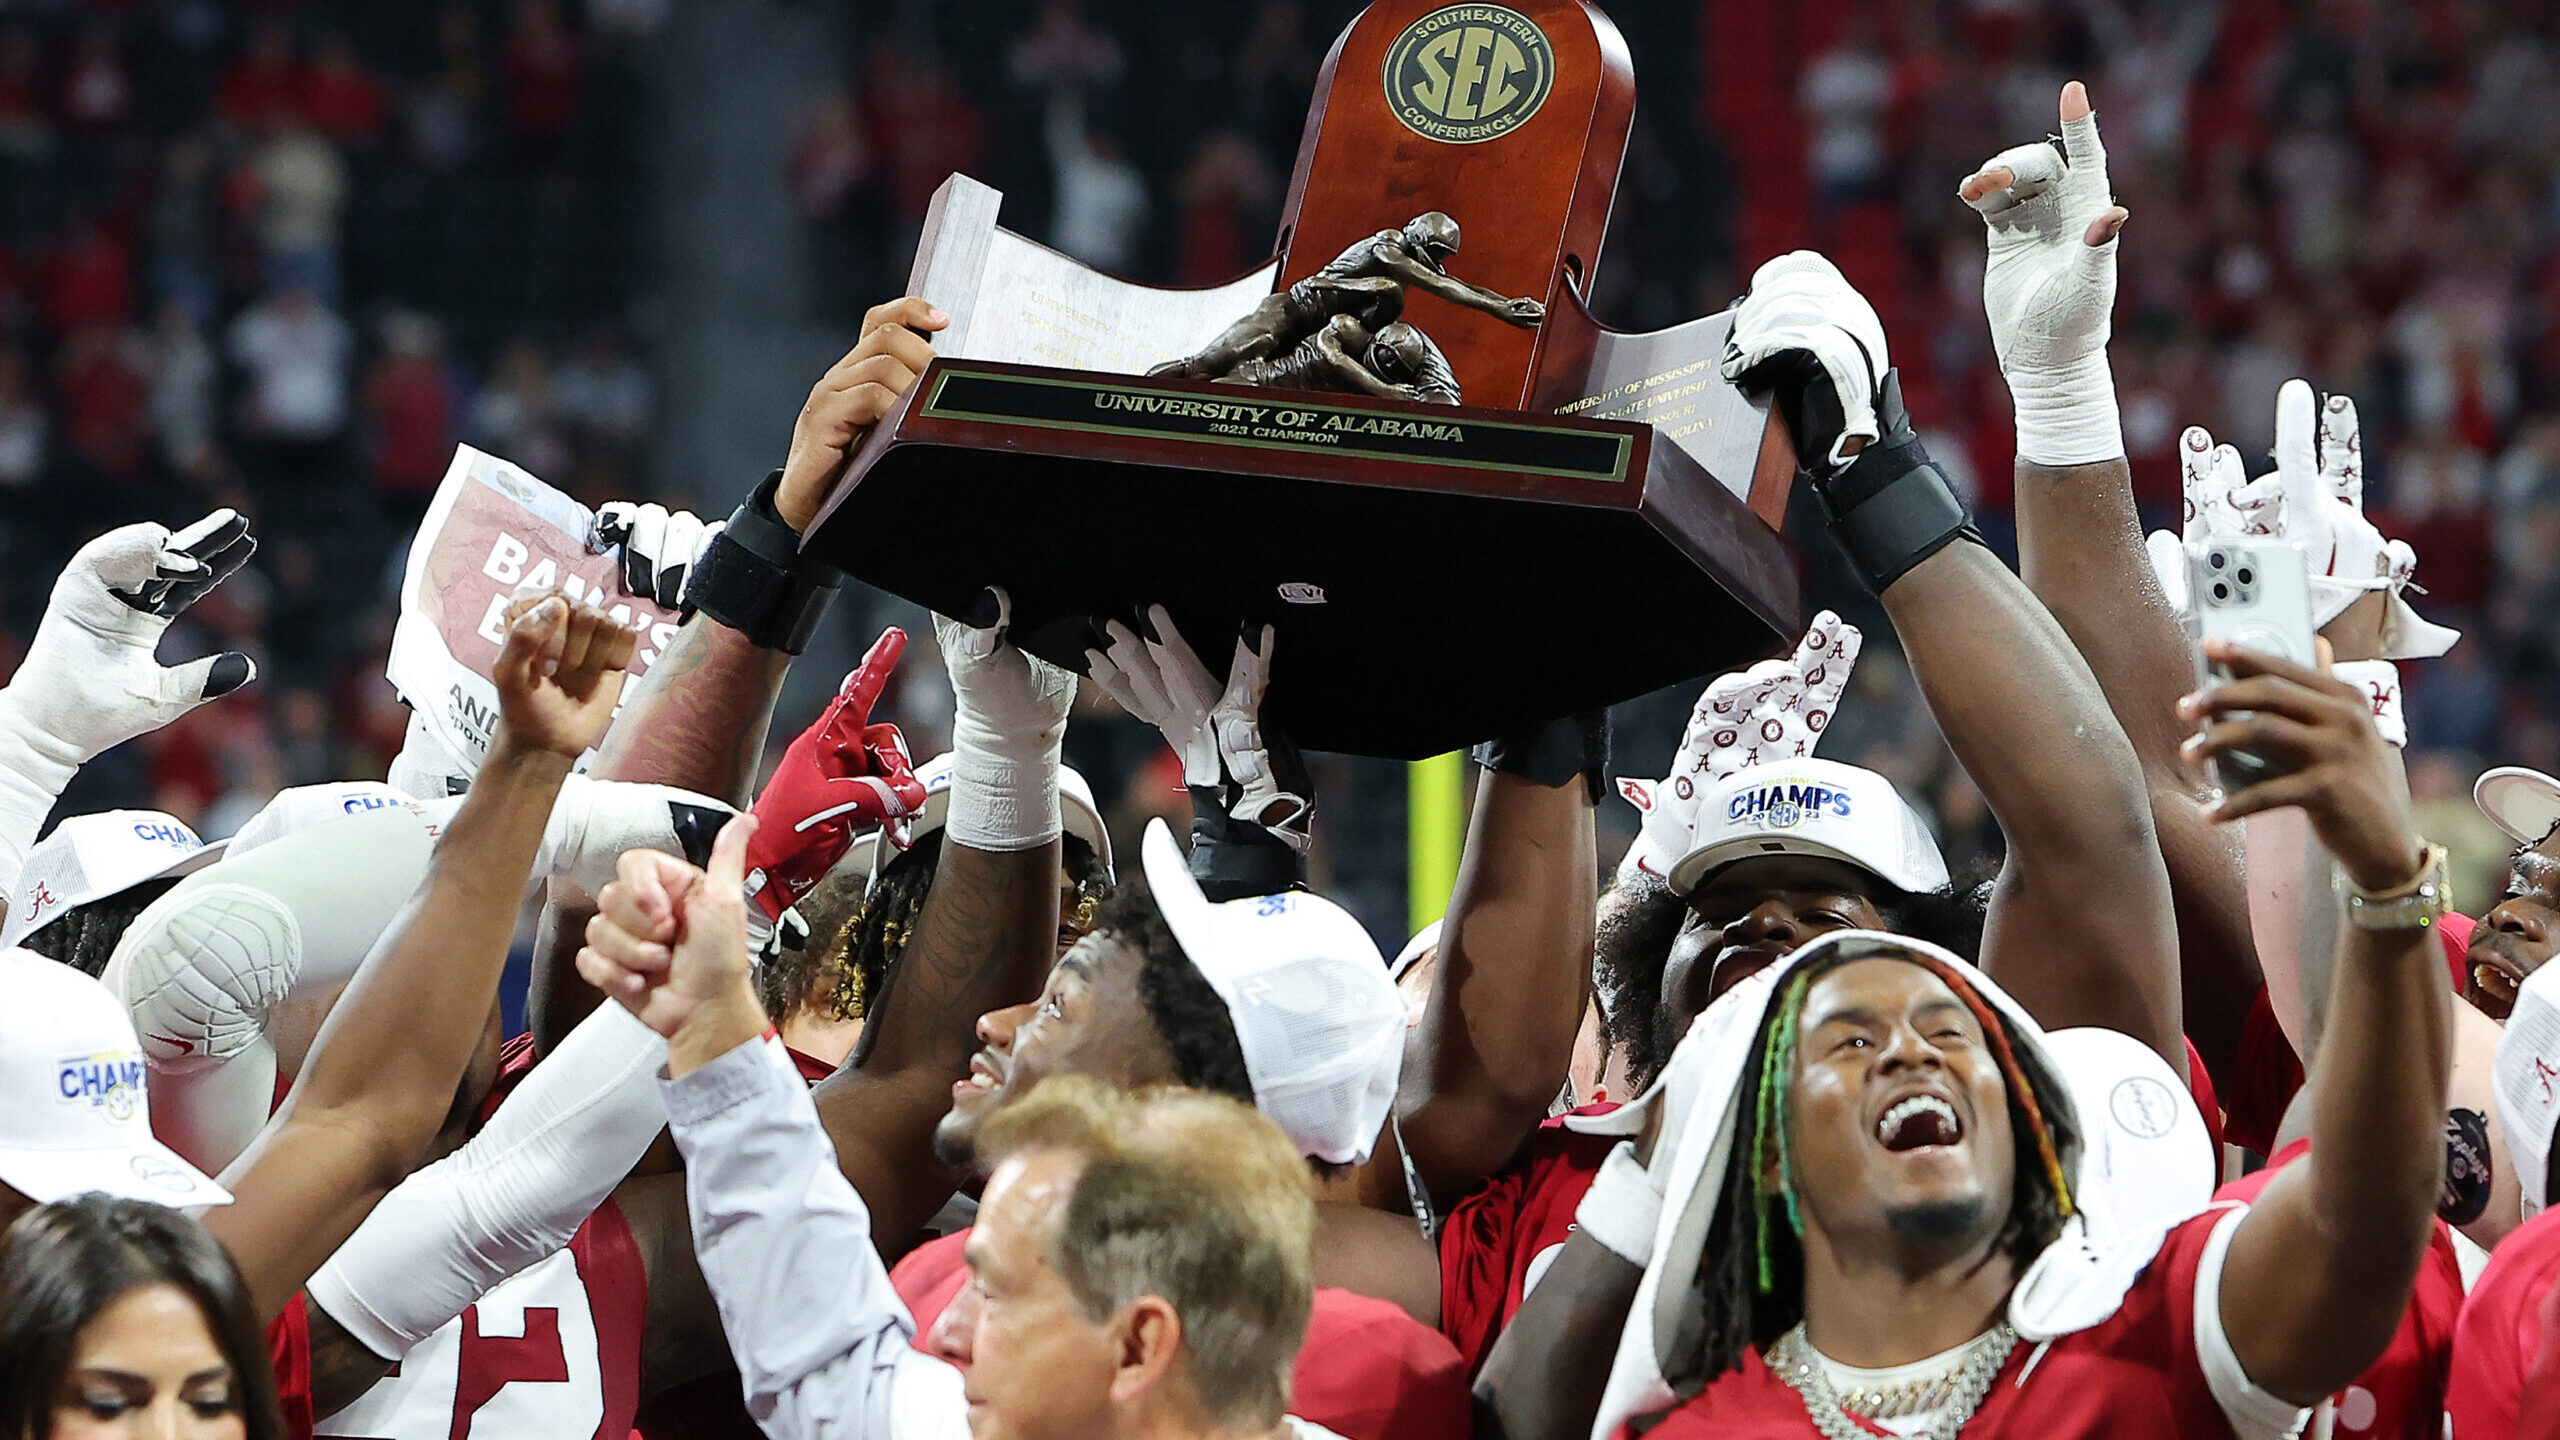 The Alabama Crimson Tide celebrate with the SEC Championship trophy after defeating the Georgia Bul...